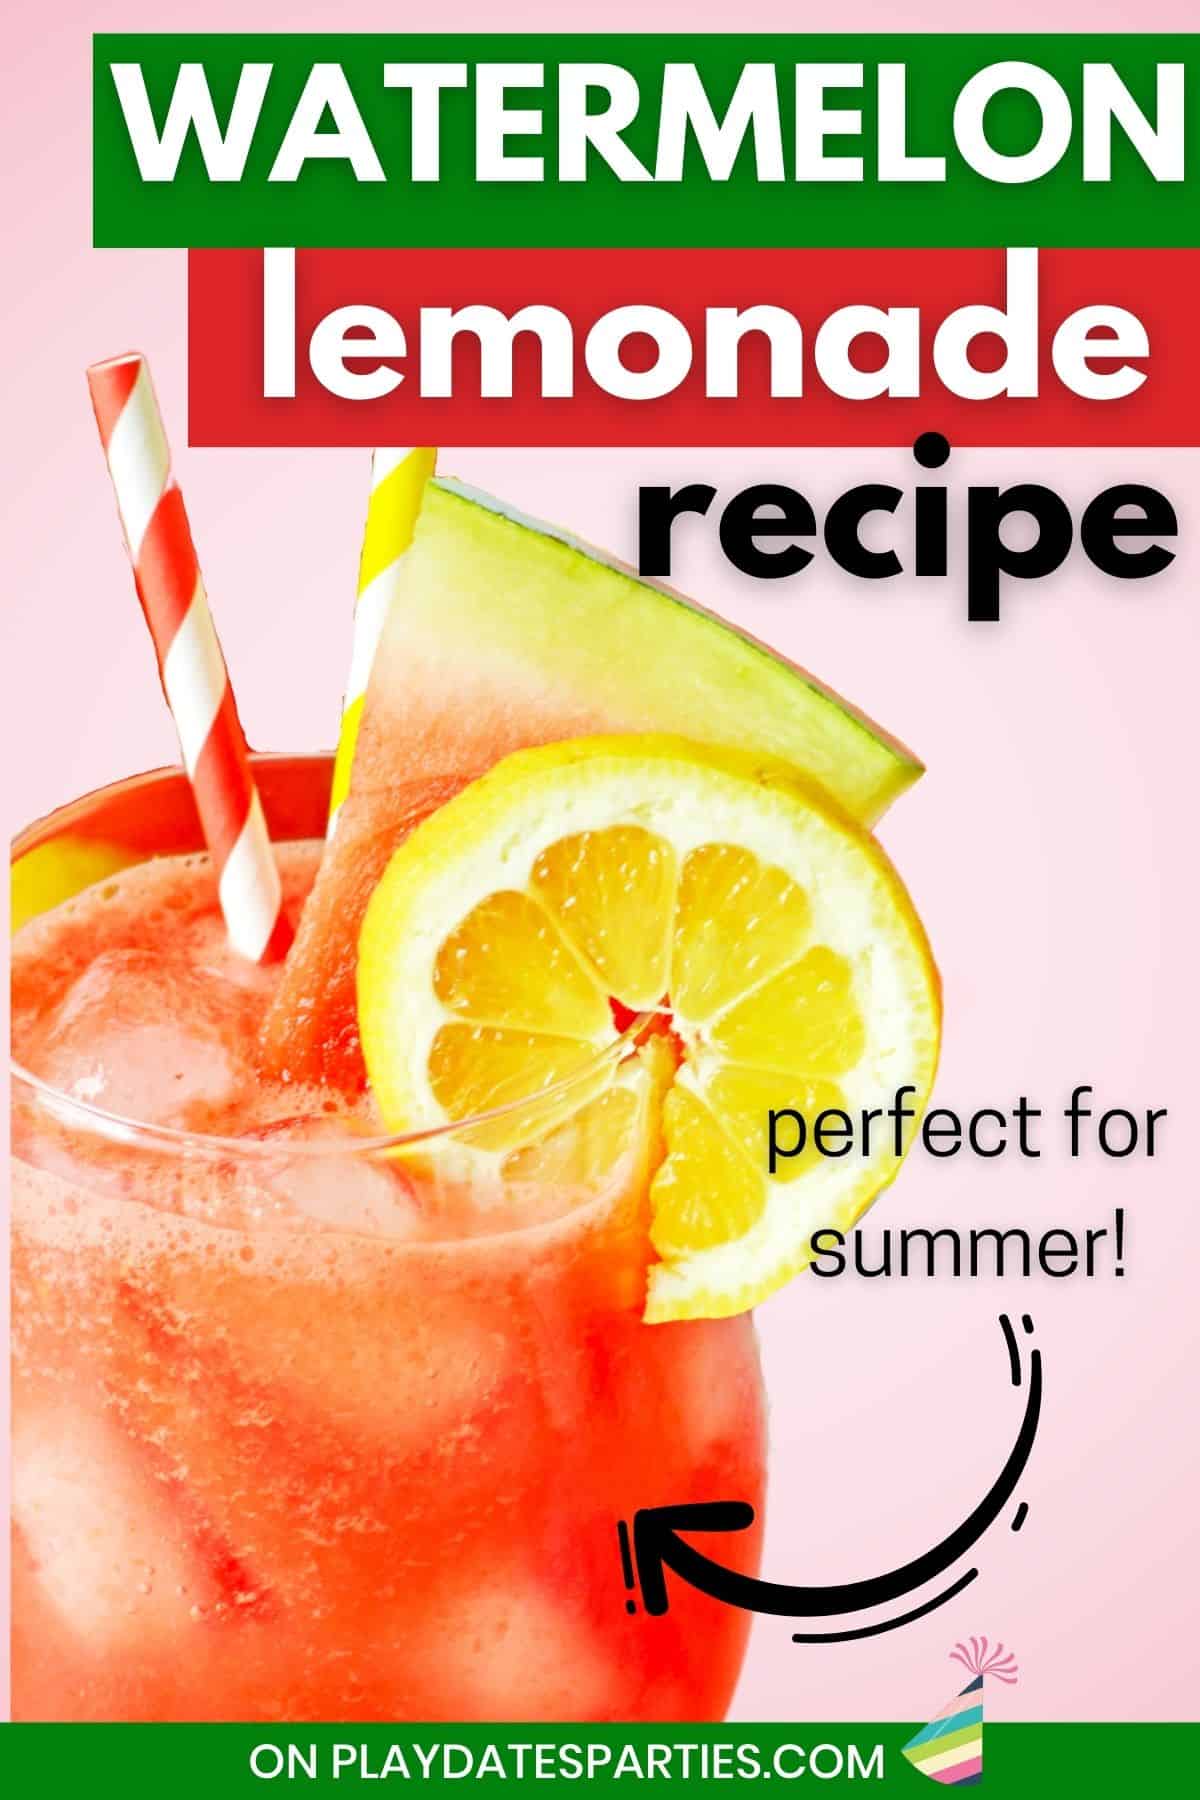 A glass of red juice with text overlay watermelon lemonade recipe perfect for summer!